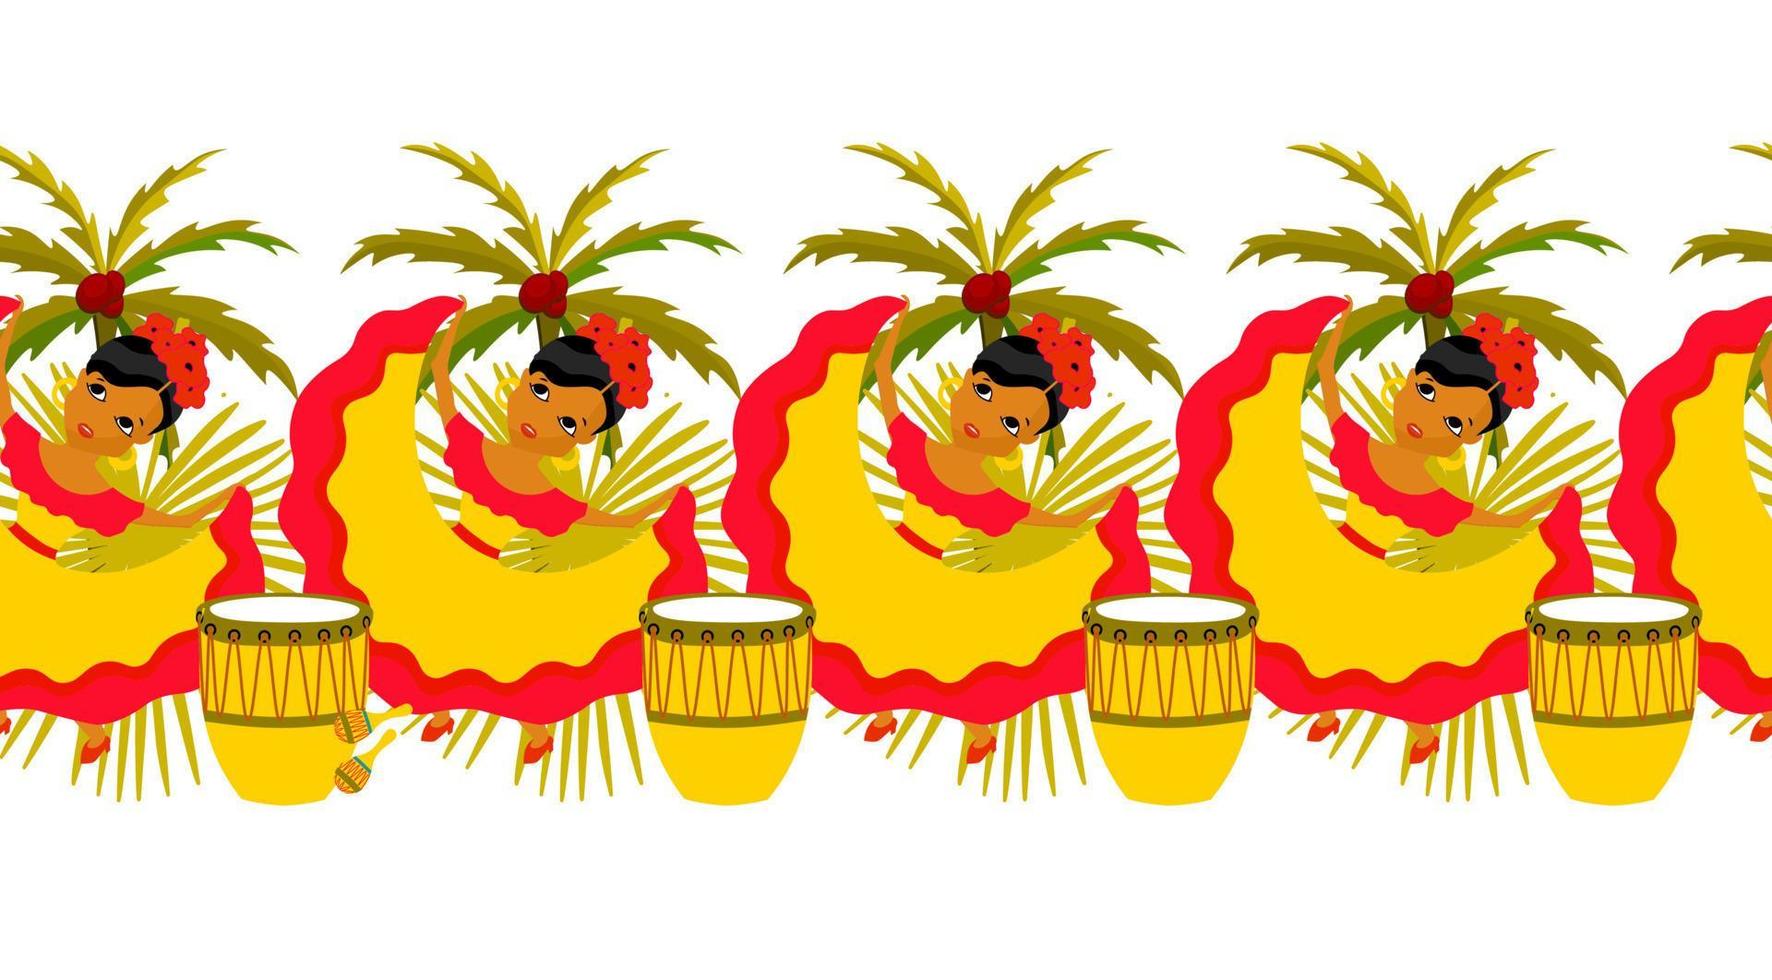 Happy Carnival, Colombia, South America Carnival with samba dancers and musicians. Seamless border colombian festival vector